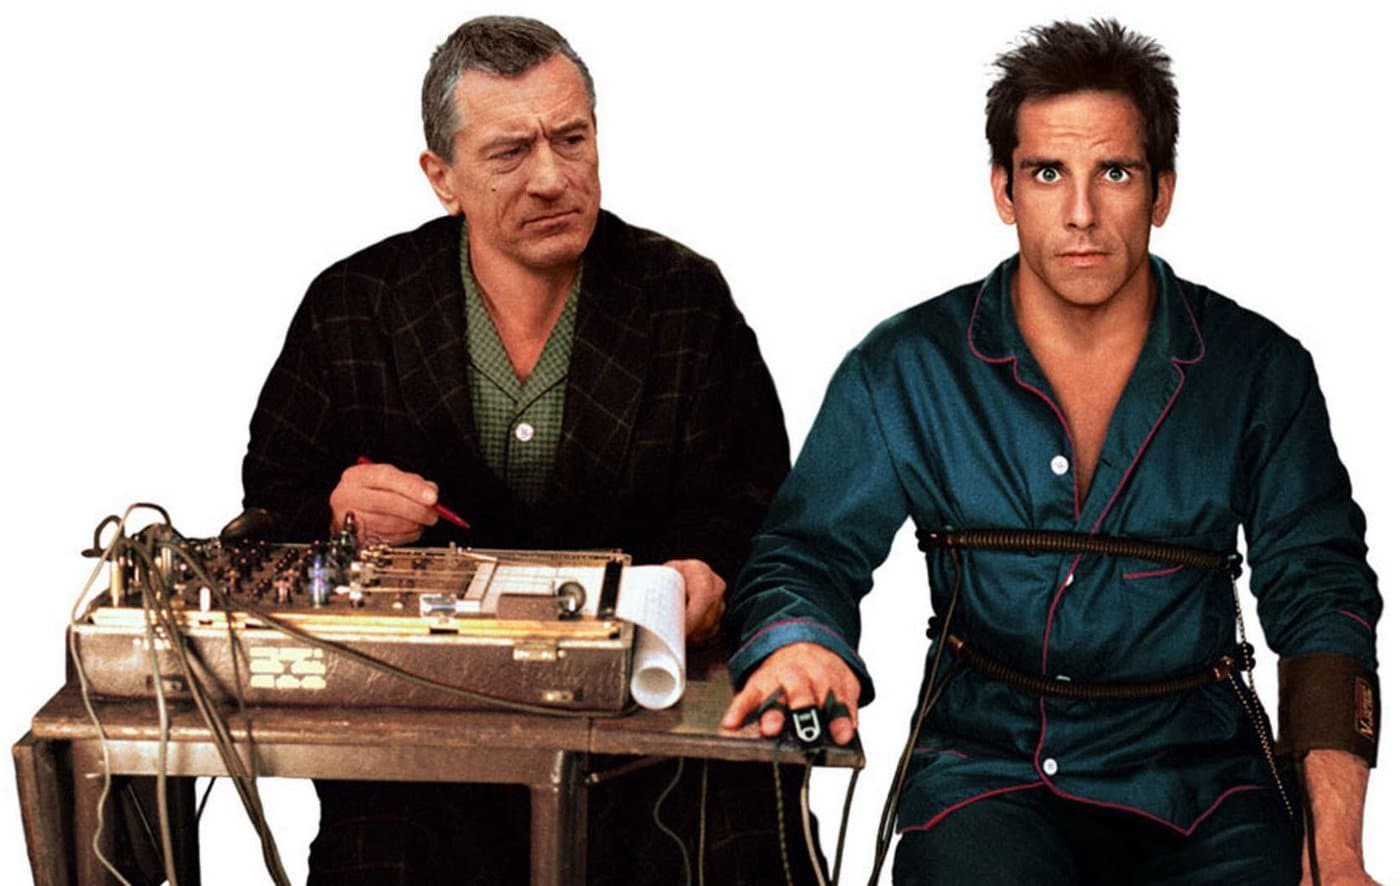 Poor Photoshop skills add a little extra to the lie-detector scene from Meet the Parents